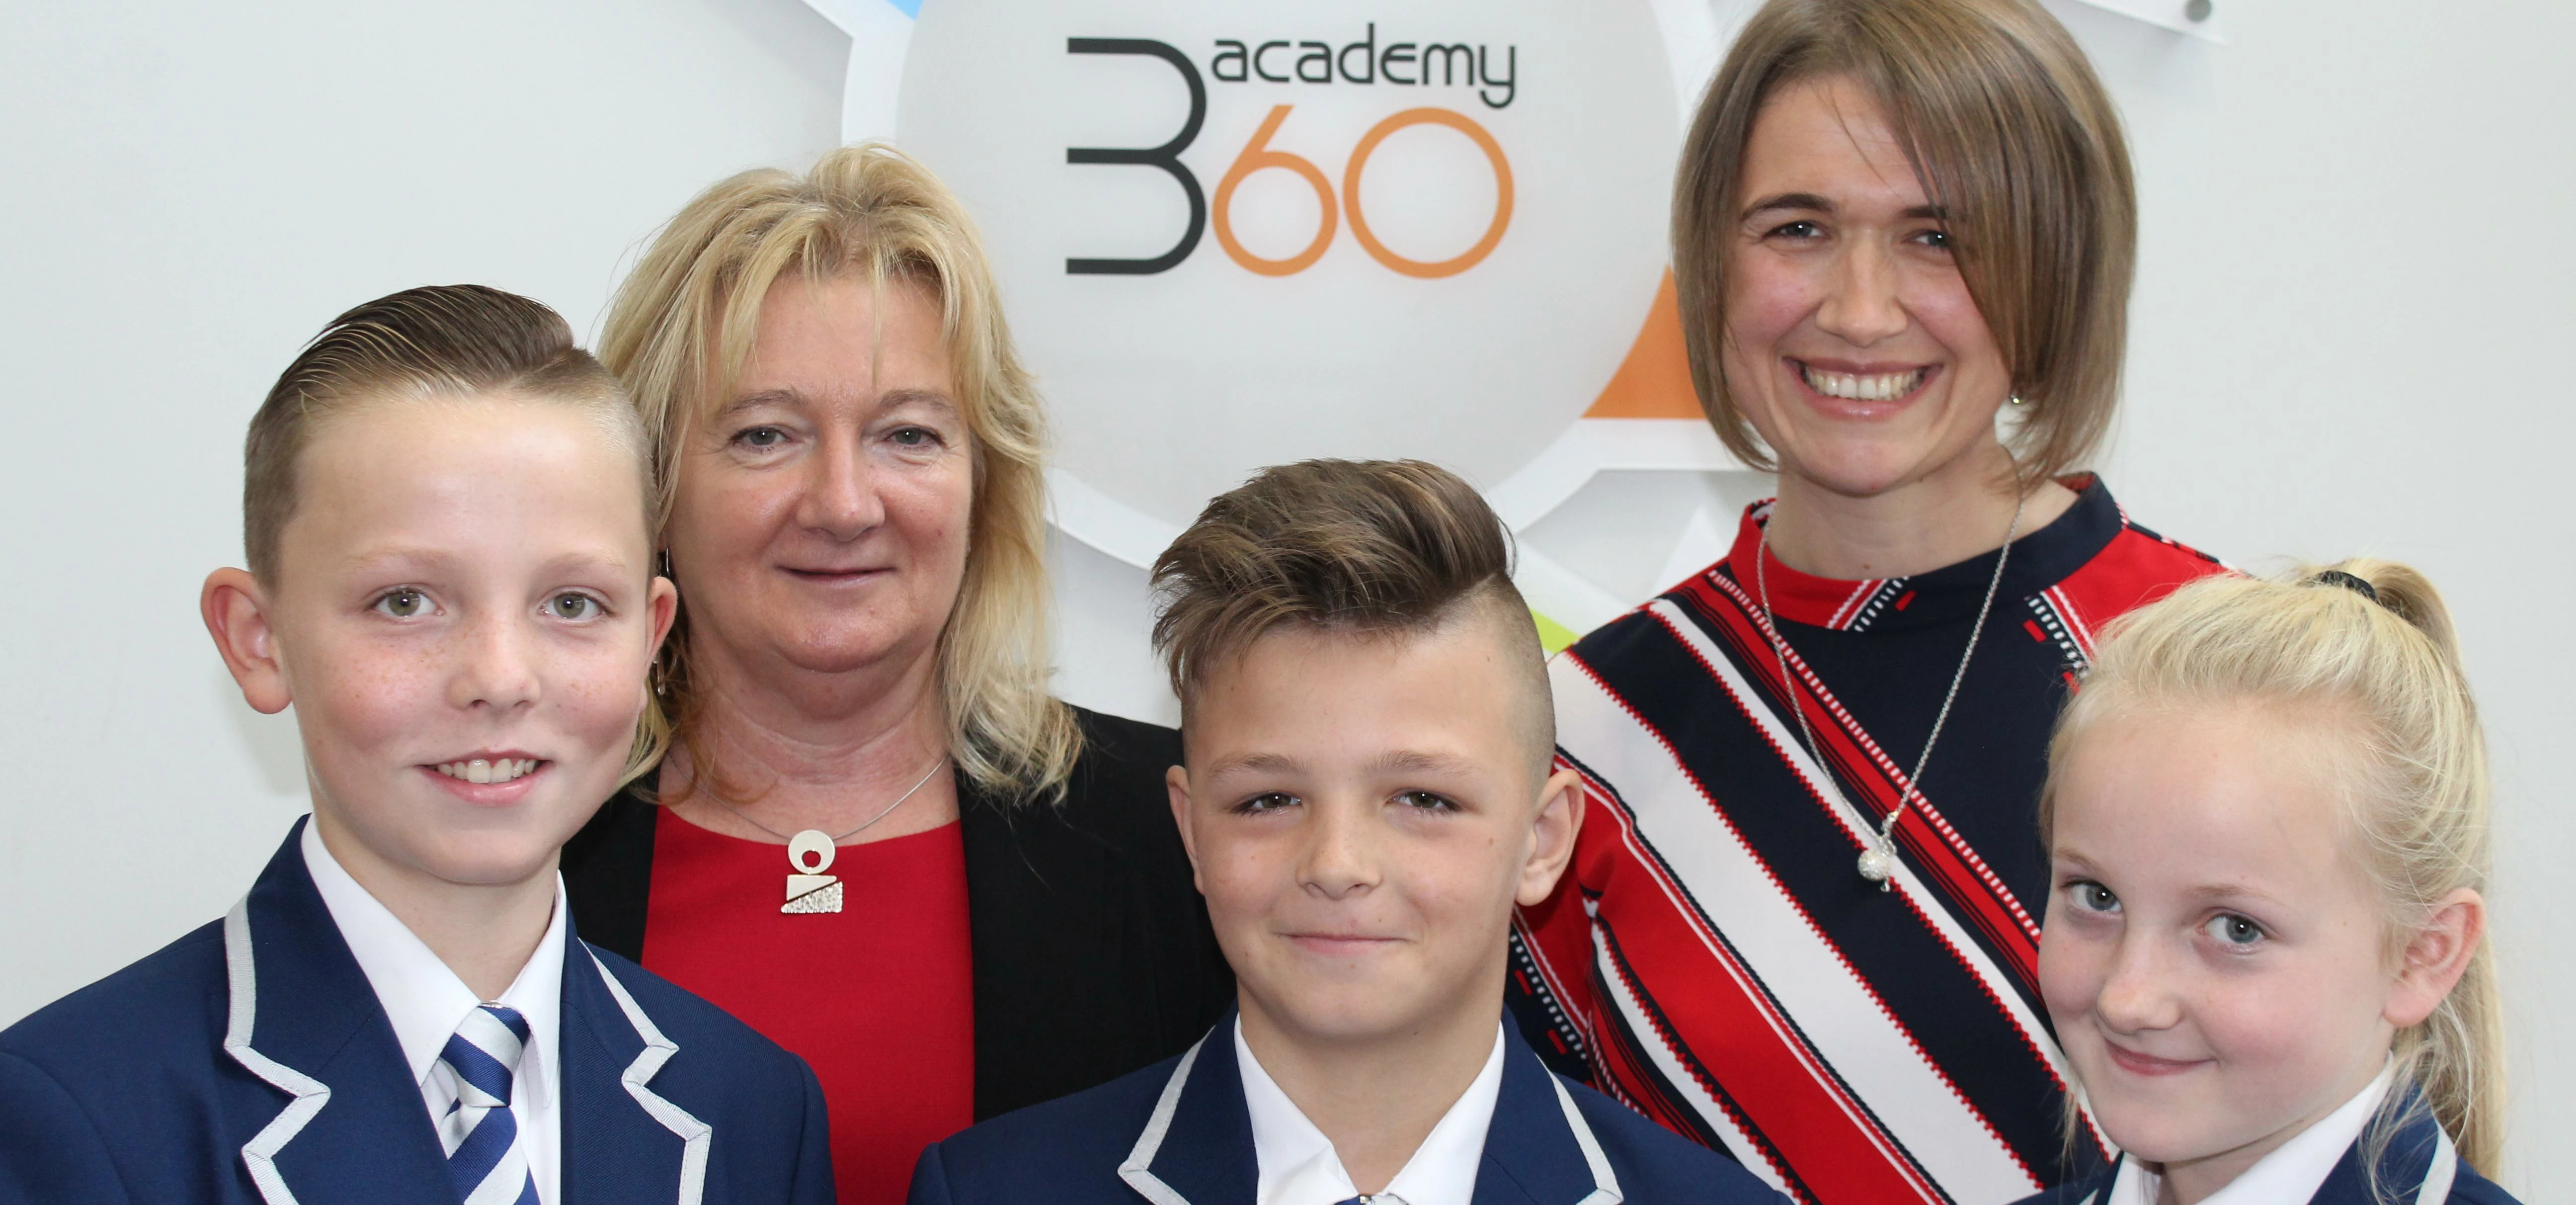 Phil Marshall (back left) and Rachel Donohue pictured with Academy 360 pupils Stephen Ellwood, Warre